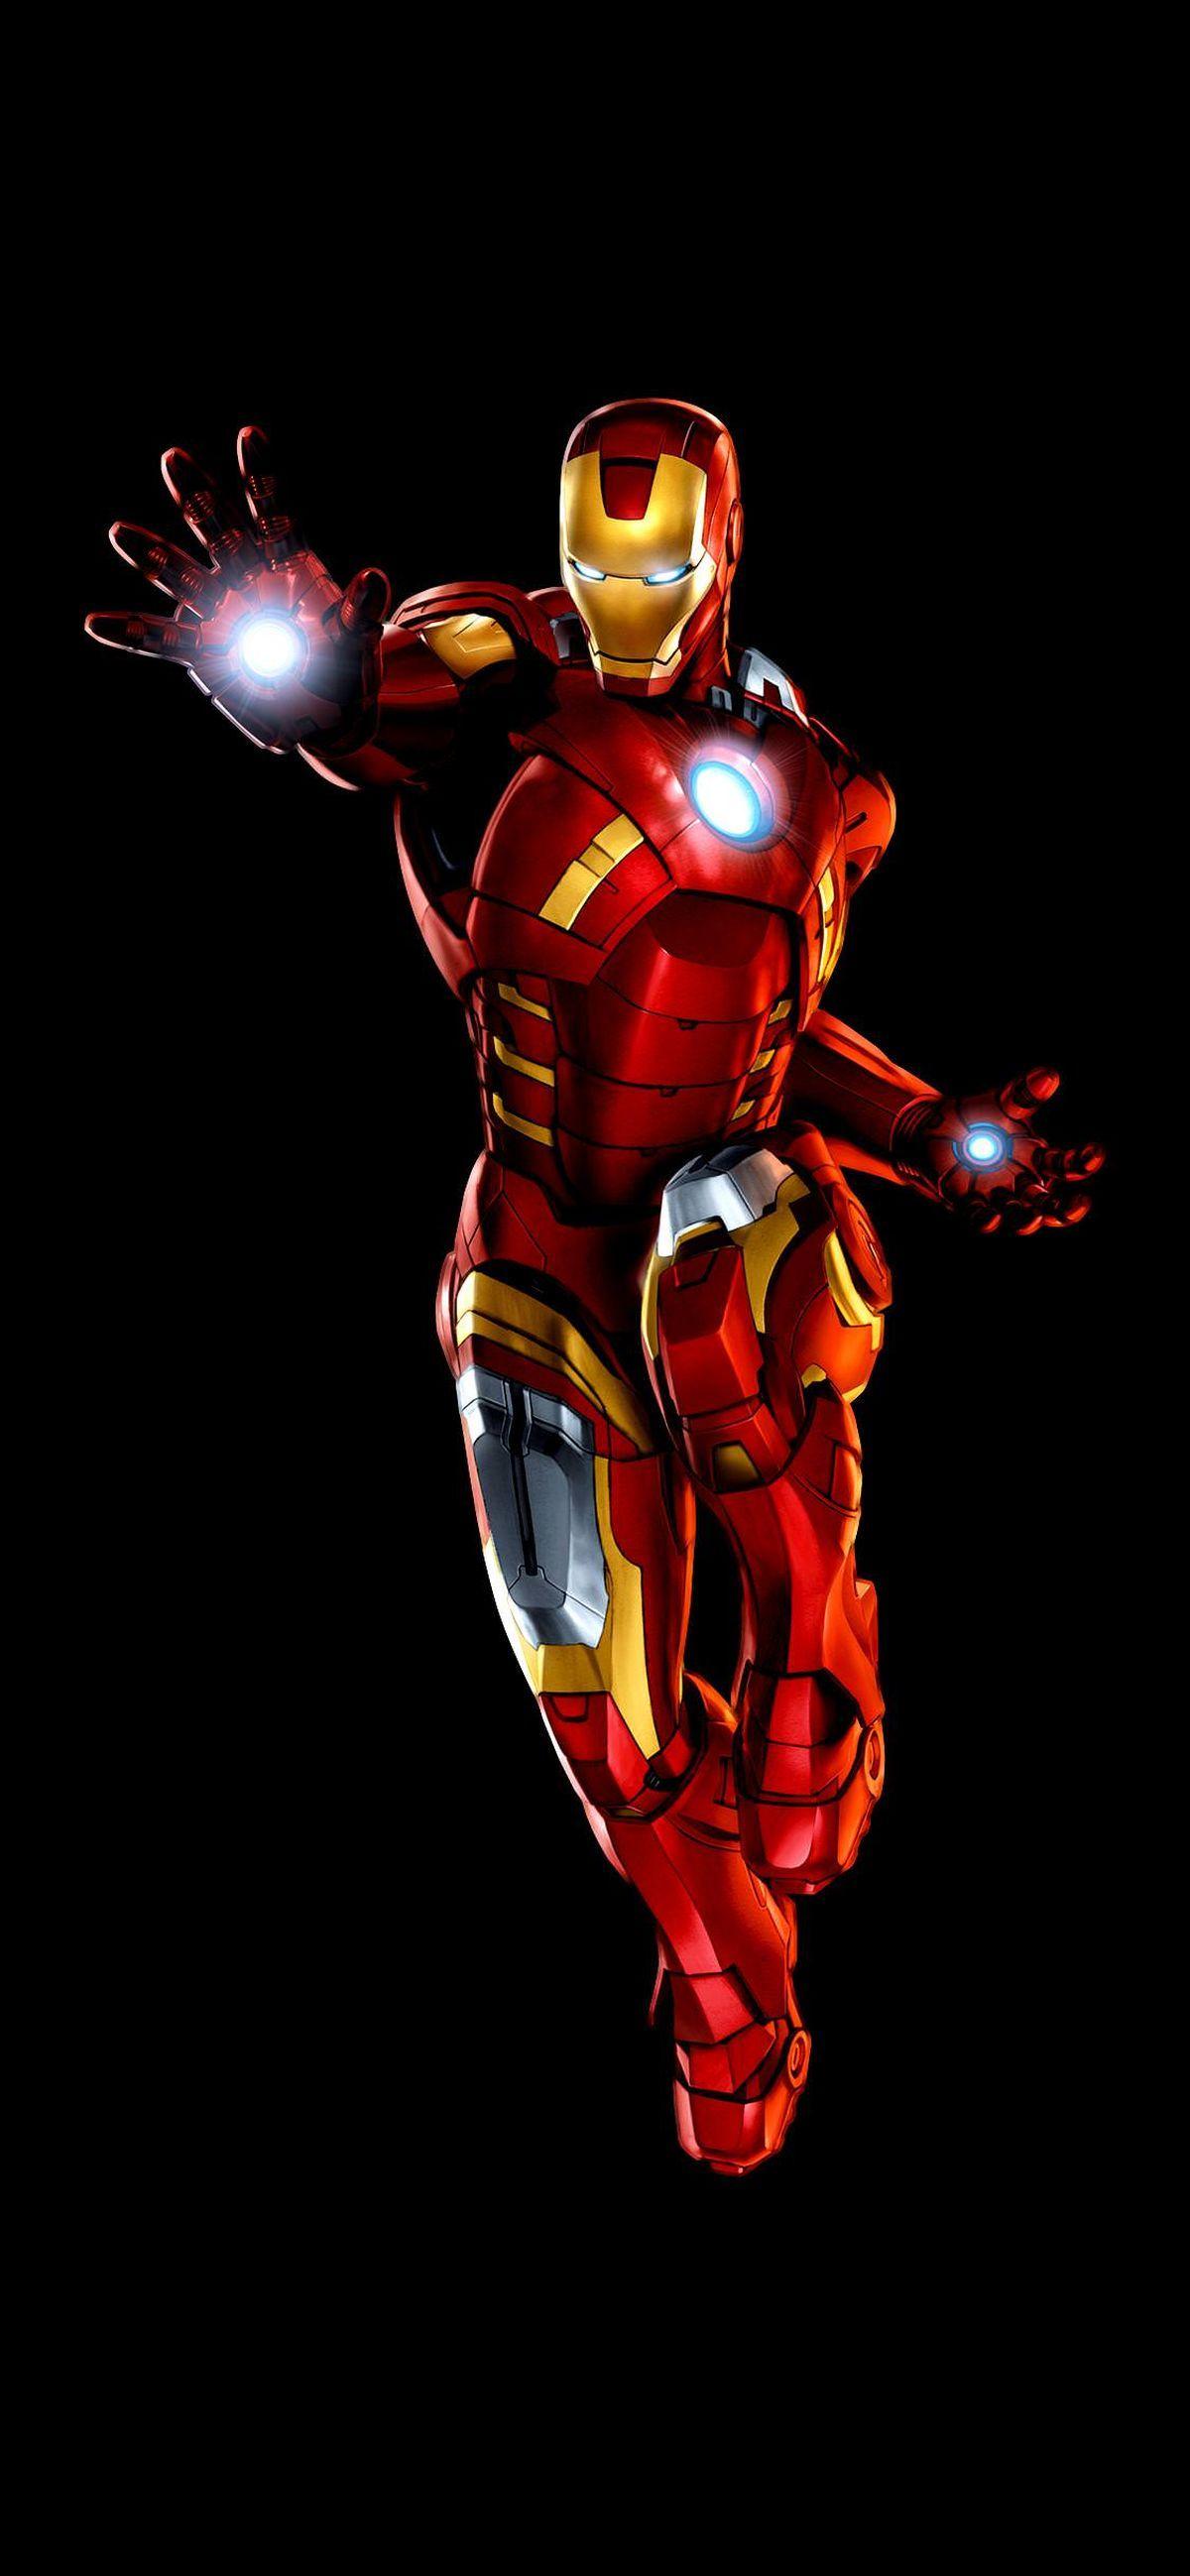 Iron Man For Phone Wallpapers - Wallpaper Cave